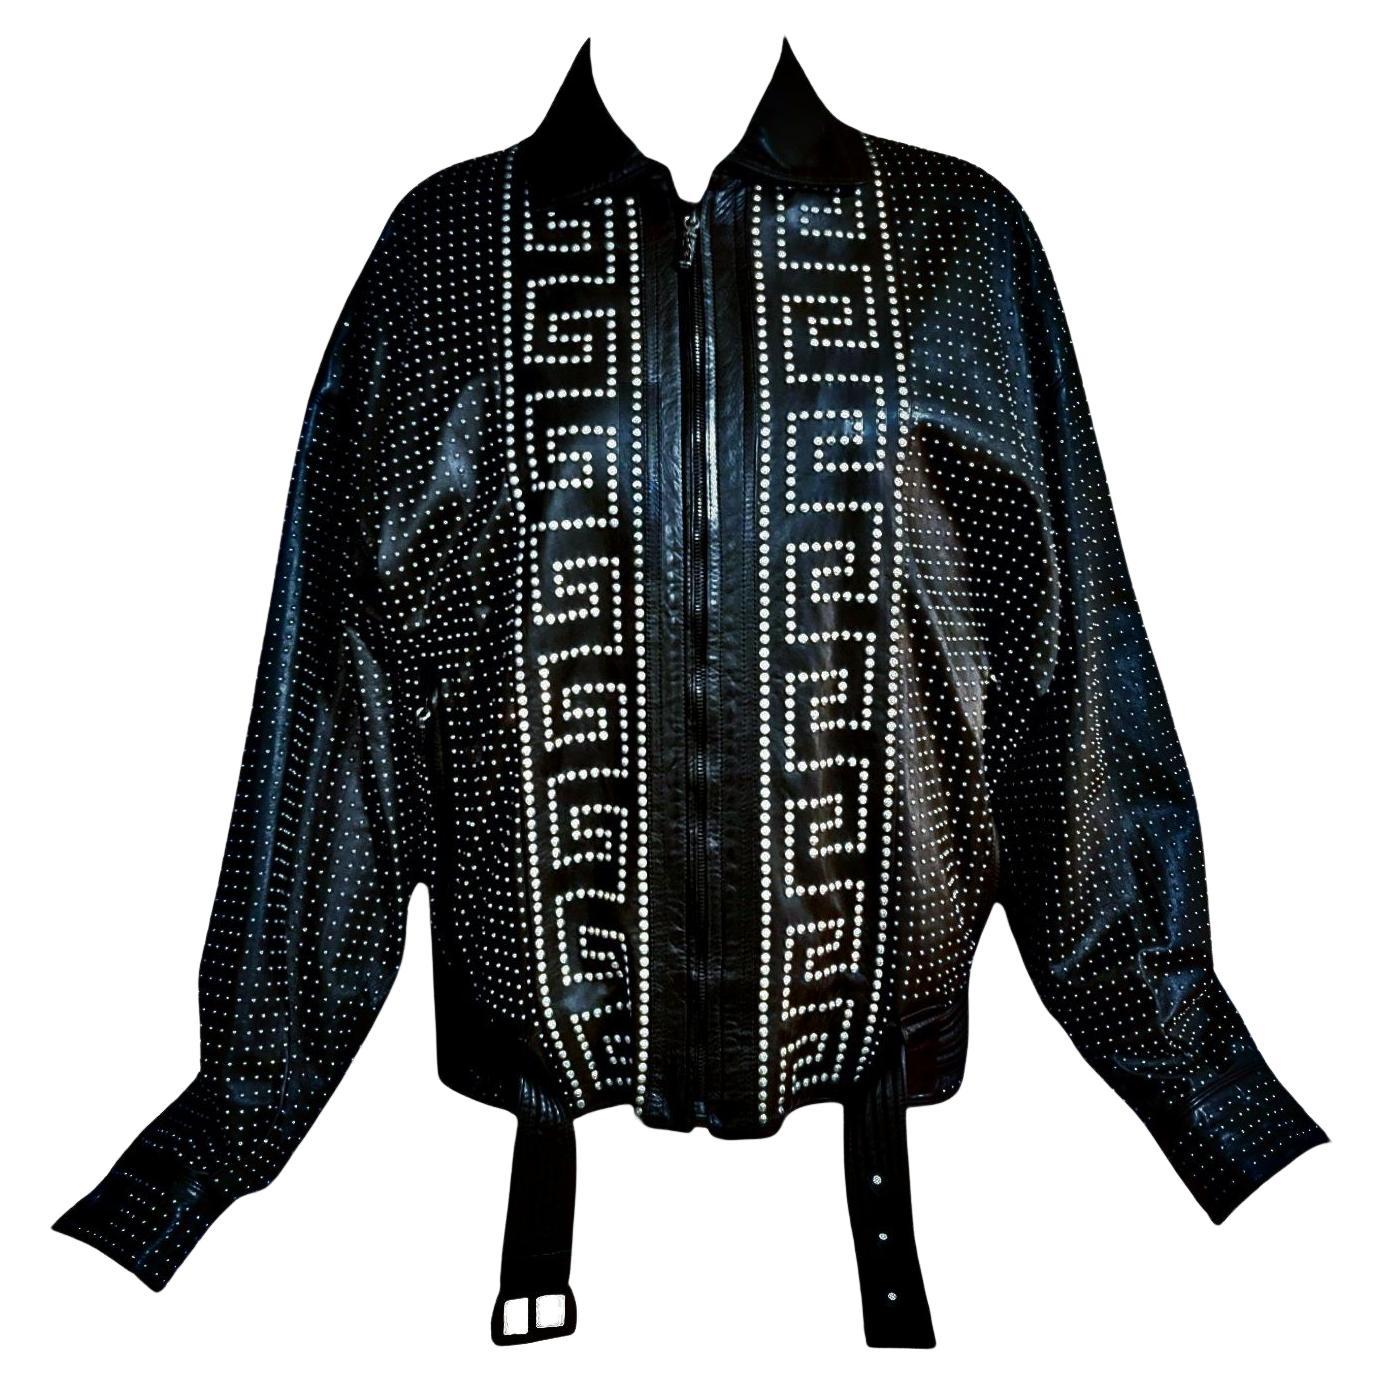 S/S 1992 Gianni Versace Greek Key Studded Leather Jacket For Sale